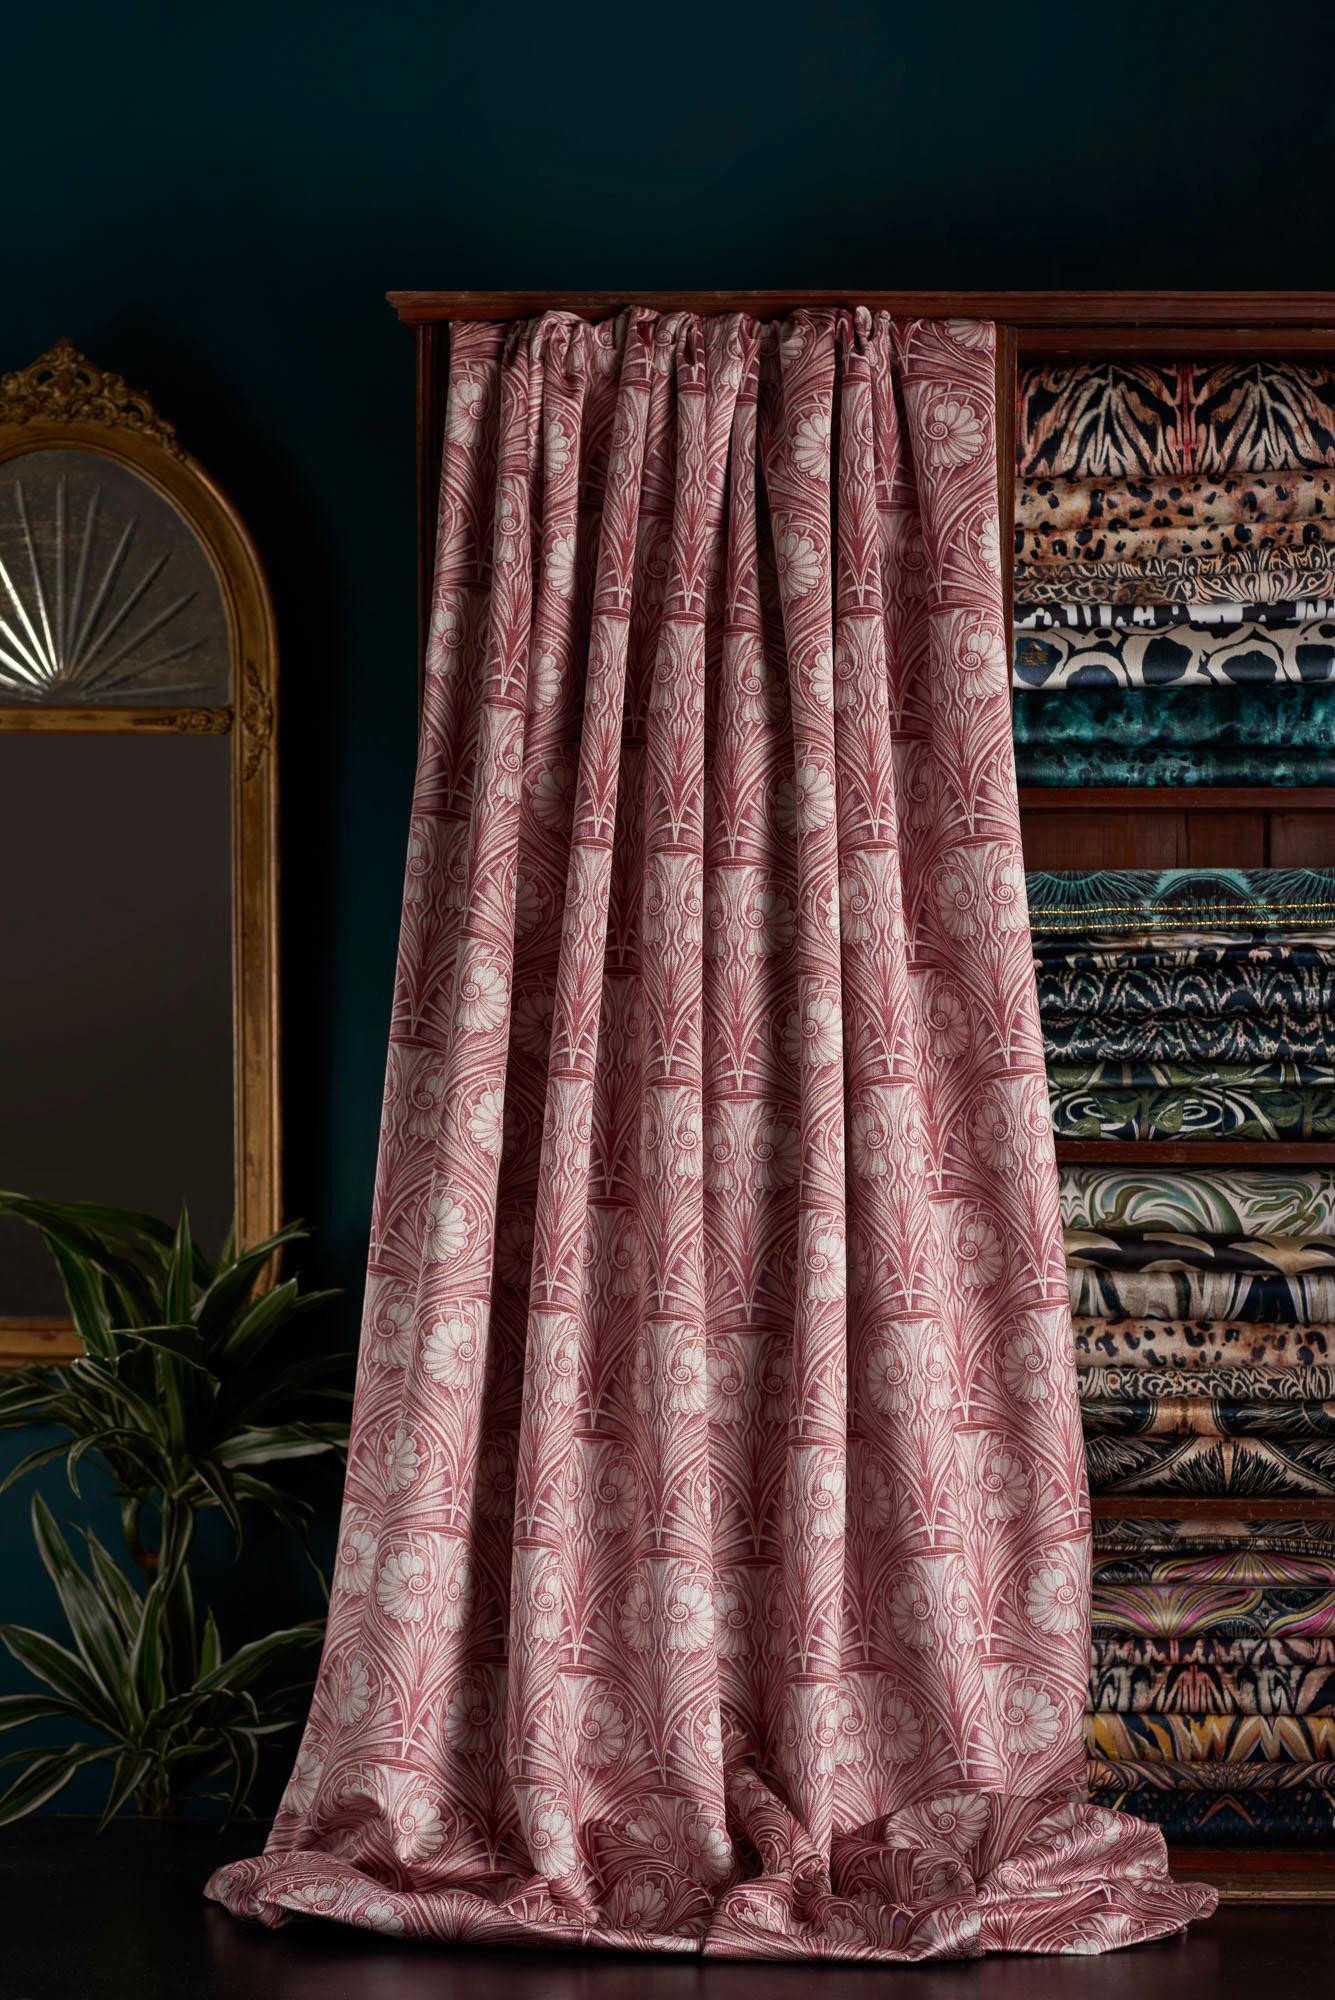 A beautifully soft and sensual design in blush rose pink. Picking up on Anna’s love of Art Nouveau, this design was hand painted, a feminine floral motif inside a scallop shell.

This velvet is midweight, with a strong straight woven backing, so is